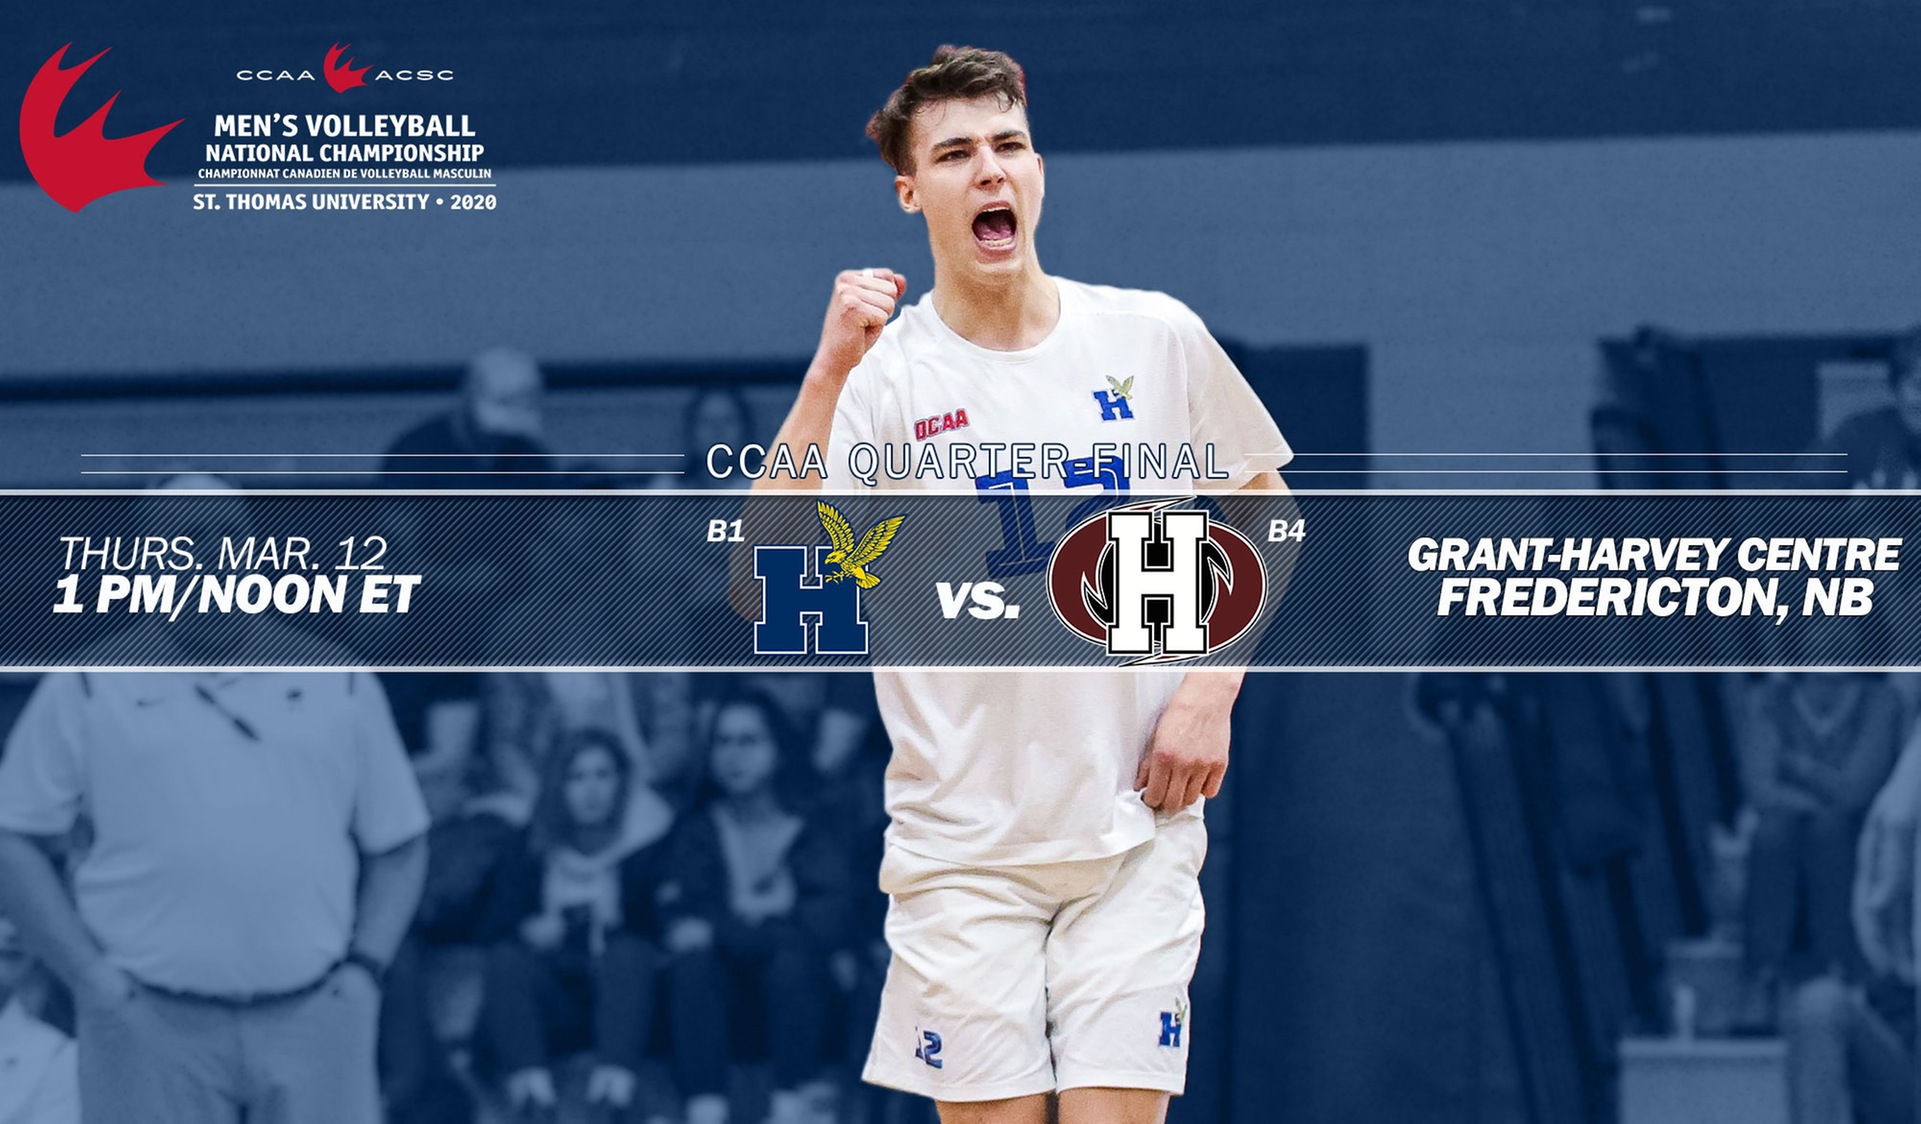 Top-Ranked Men's Volleyball Opens Championship Thursday